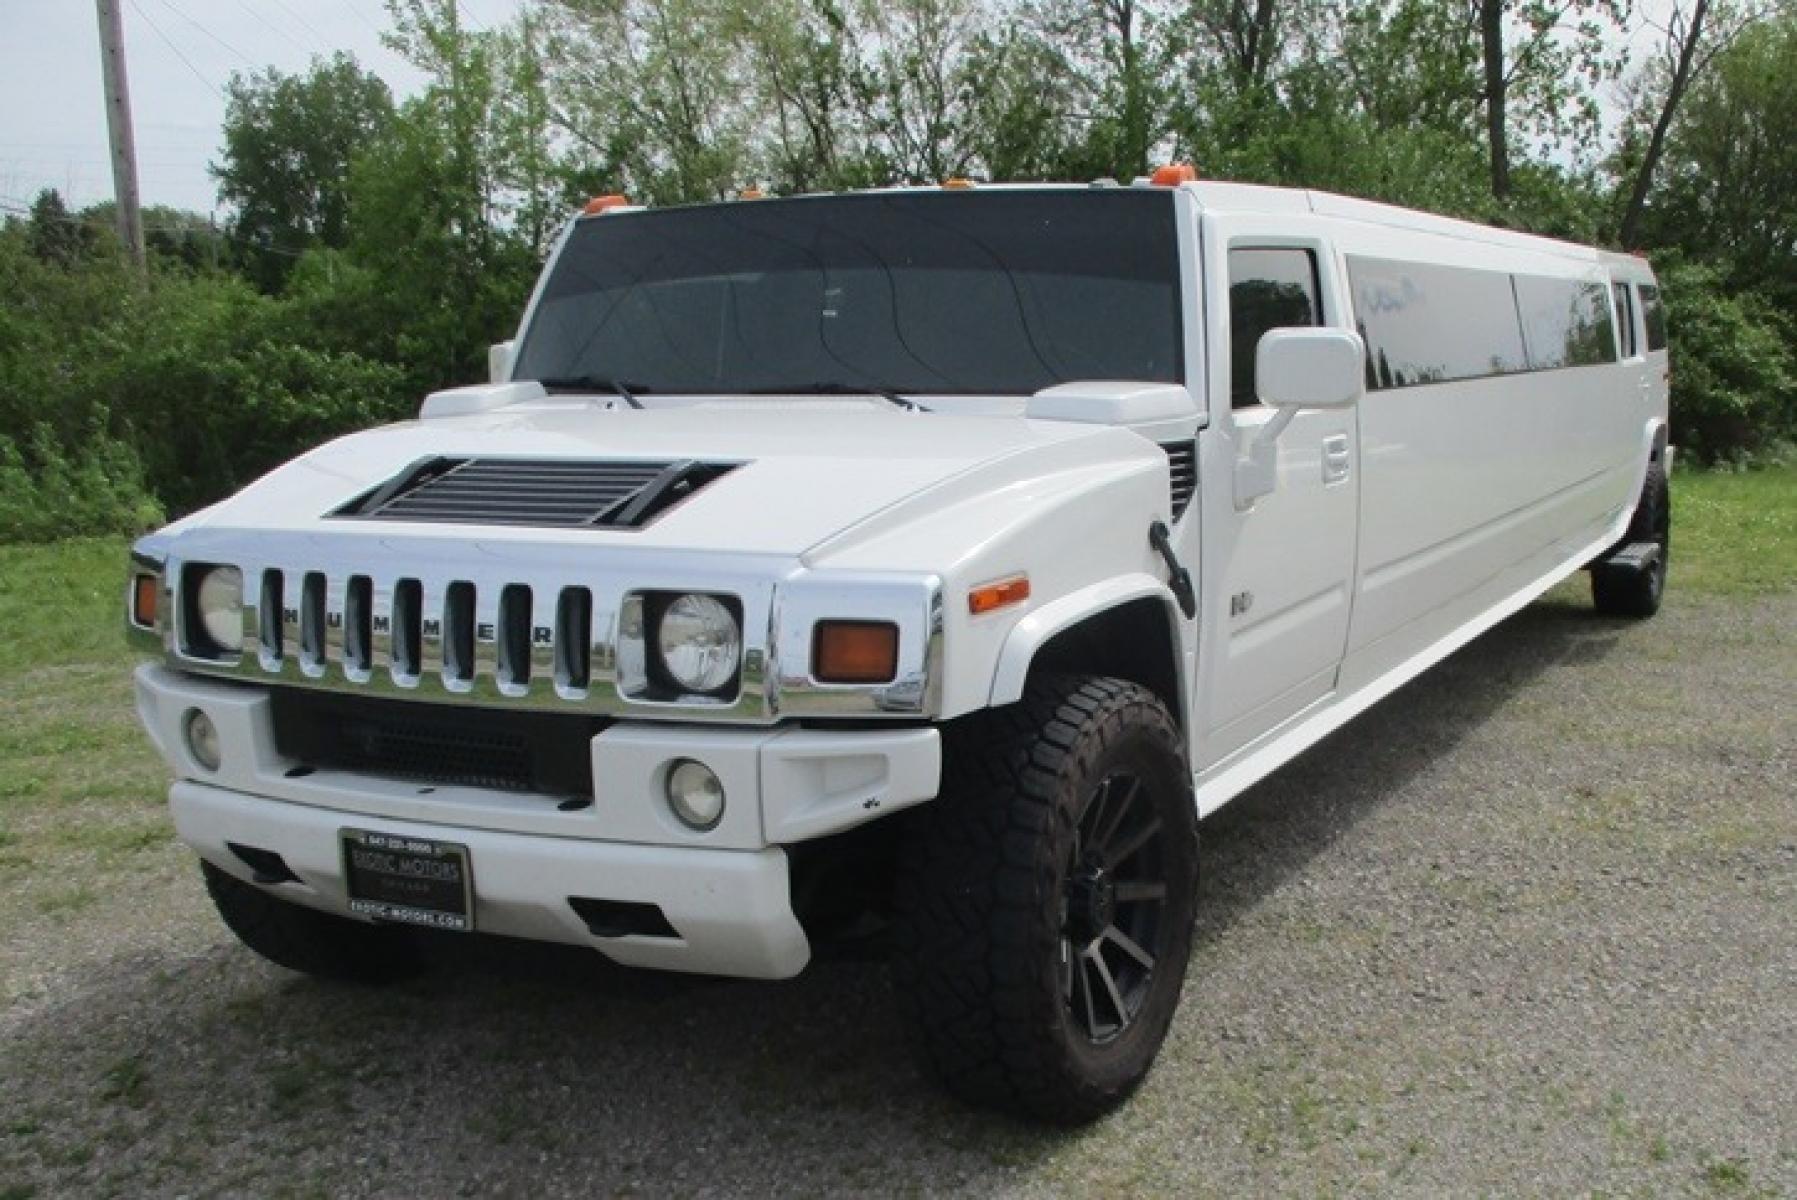 2005 White /White/Black Hummer H2 , located at 1725 US-68 N, Bellefontaine, OH, 43311, (937) 592-5466, 40.387783, -83.752388 - 2005 Hummer H2 175" SUV VIP Limousine, White w/White/black leather interior, Front/Rear Ait, Flat Screens, AM/FM/CD reconditioned Interior, LOADED - Photo #0